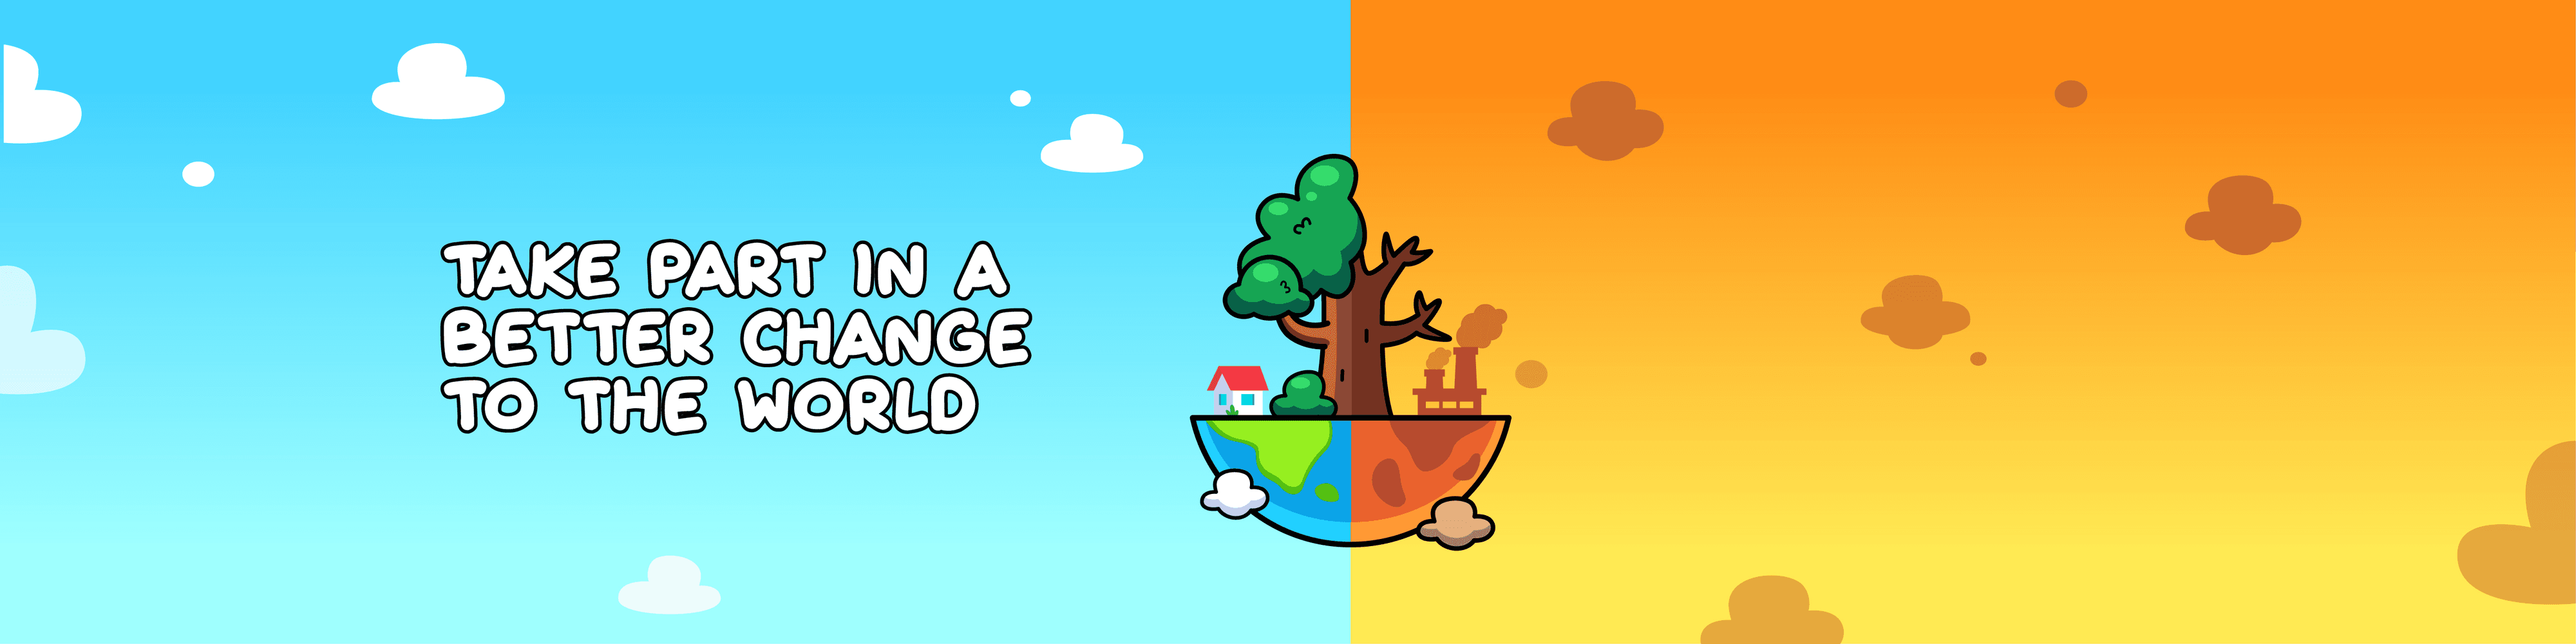 HappyTrees-official banner